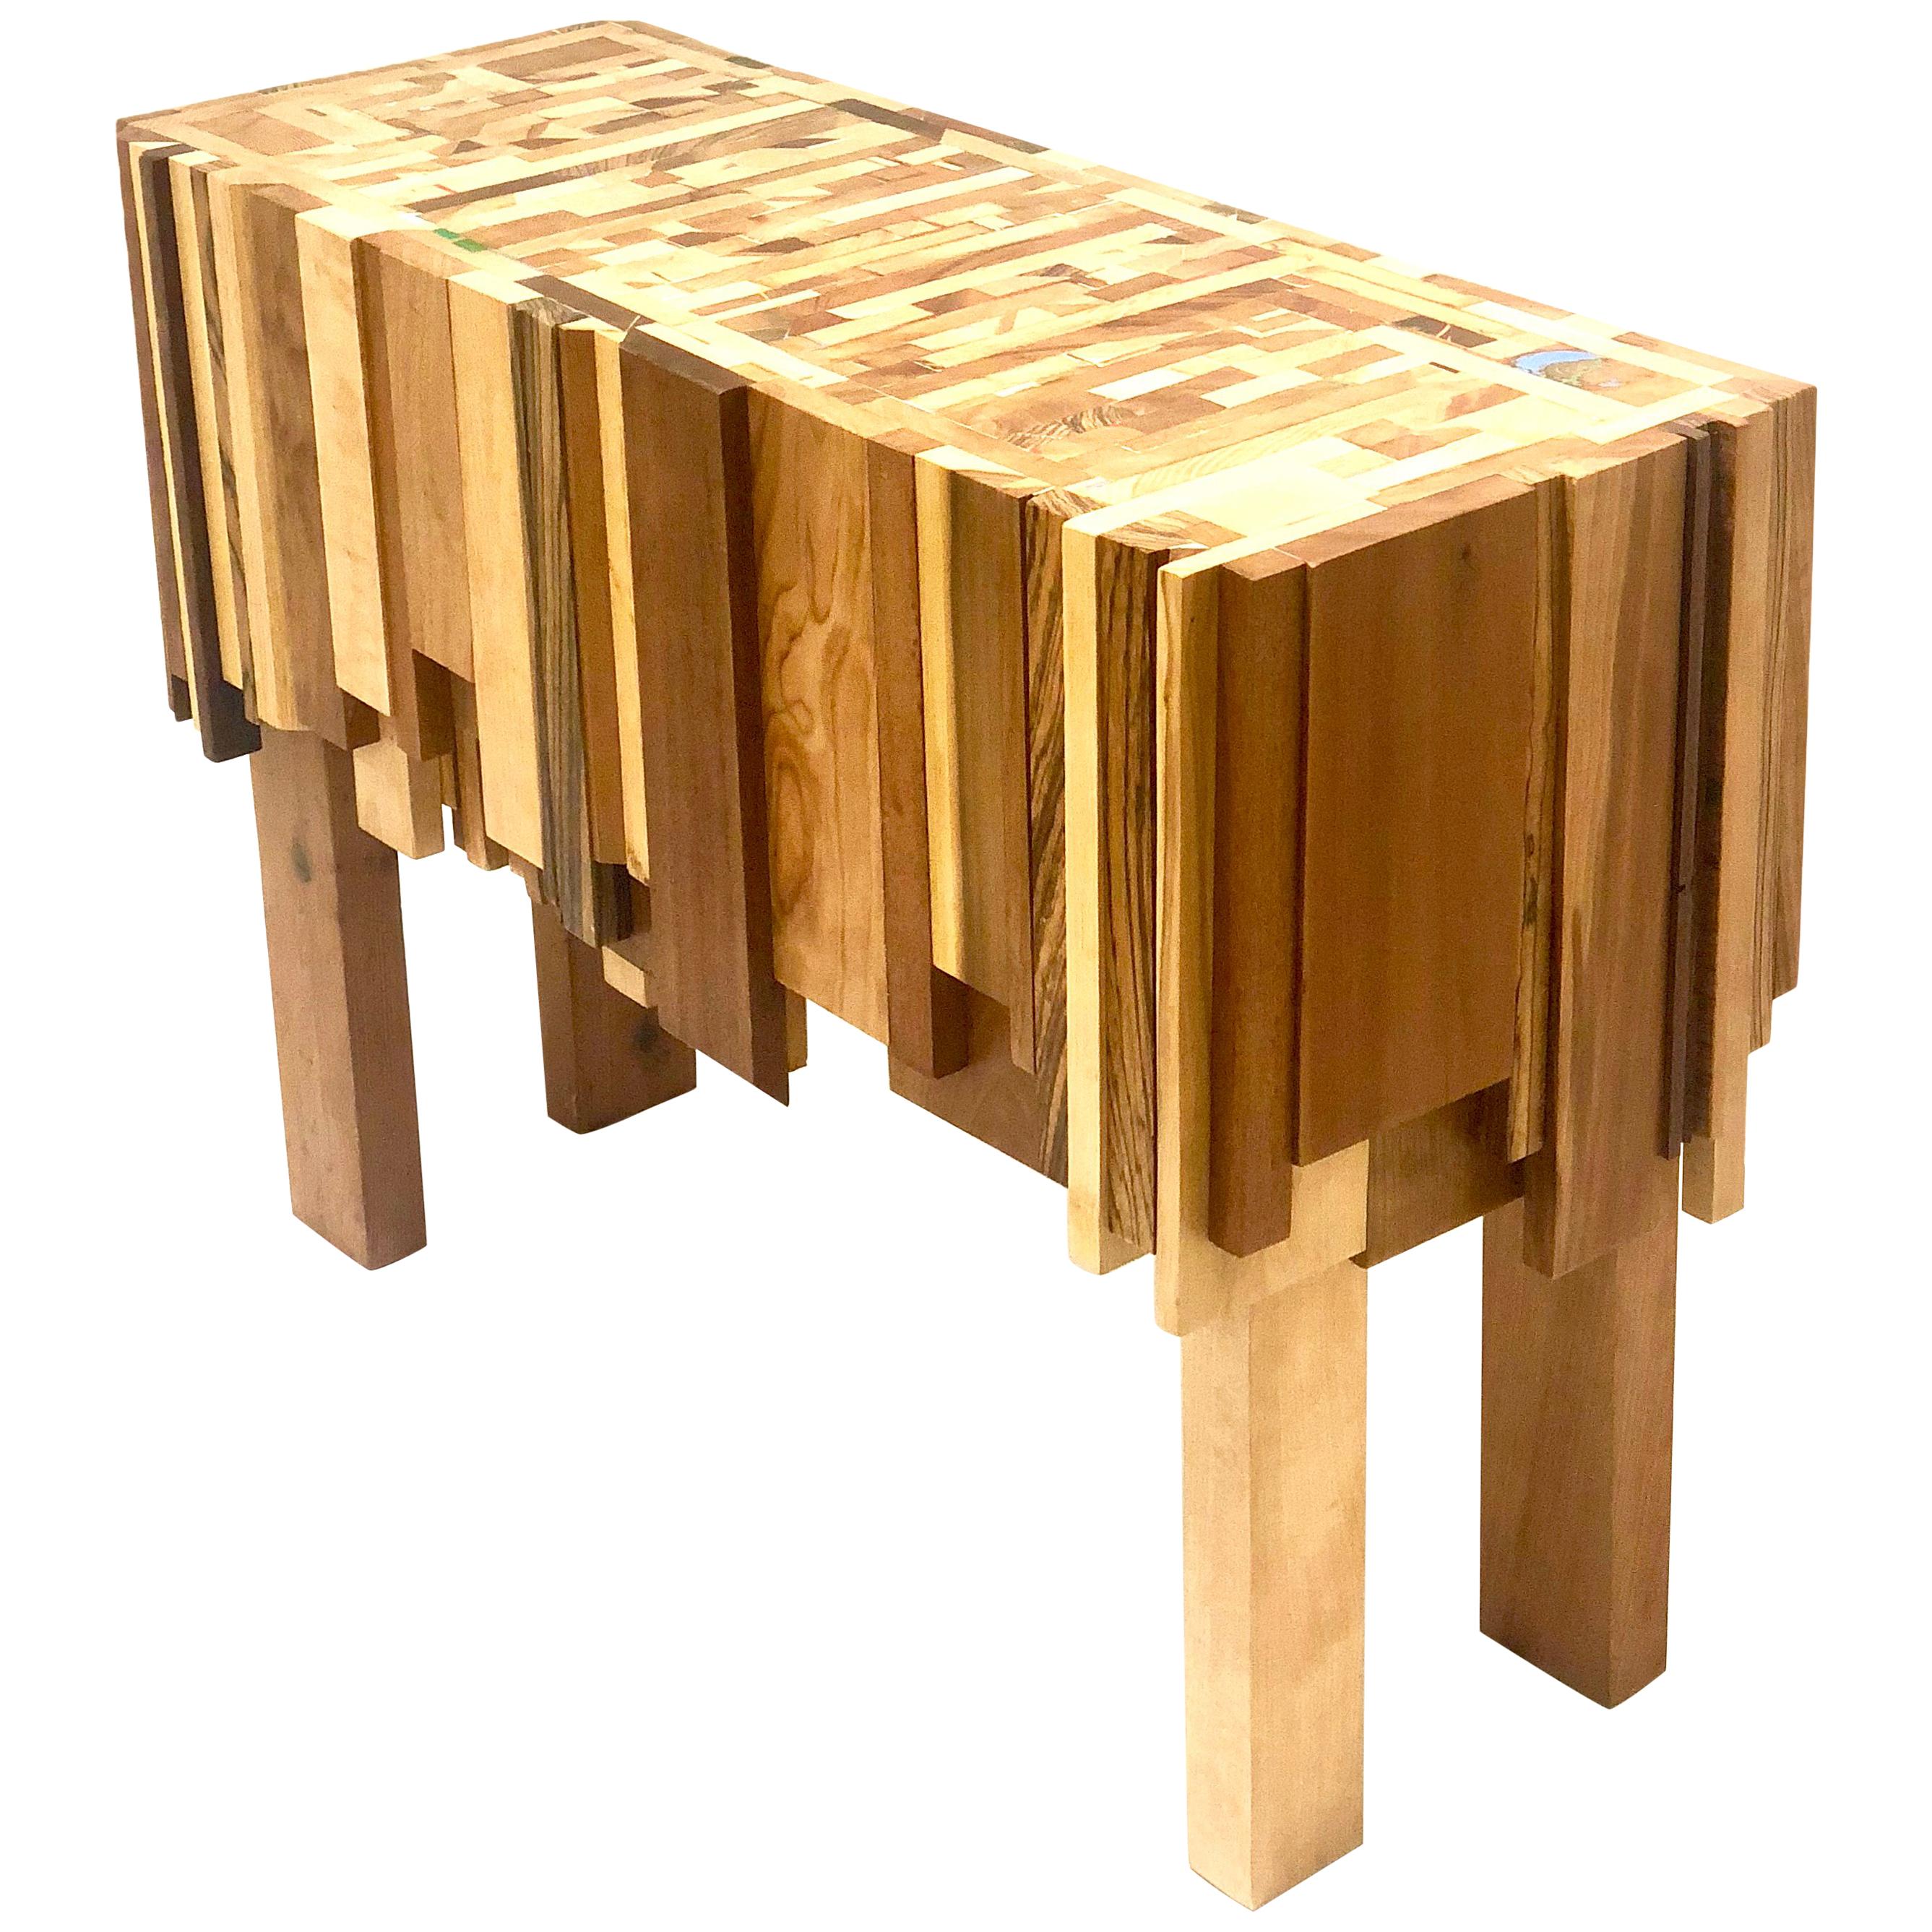 Mixed Wood and Acrylic Table by Ben Darby, 2018